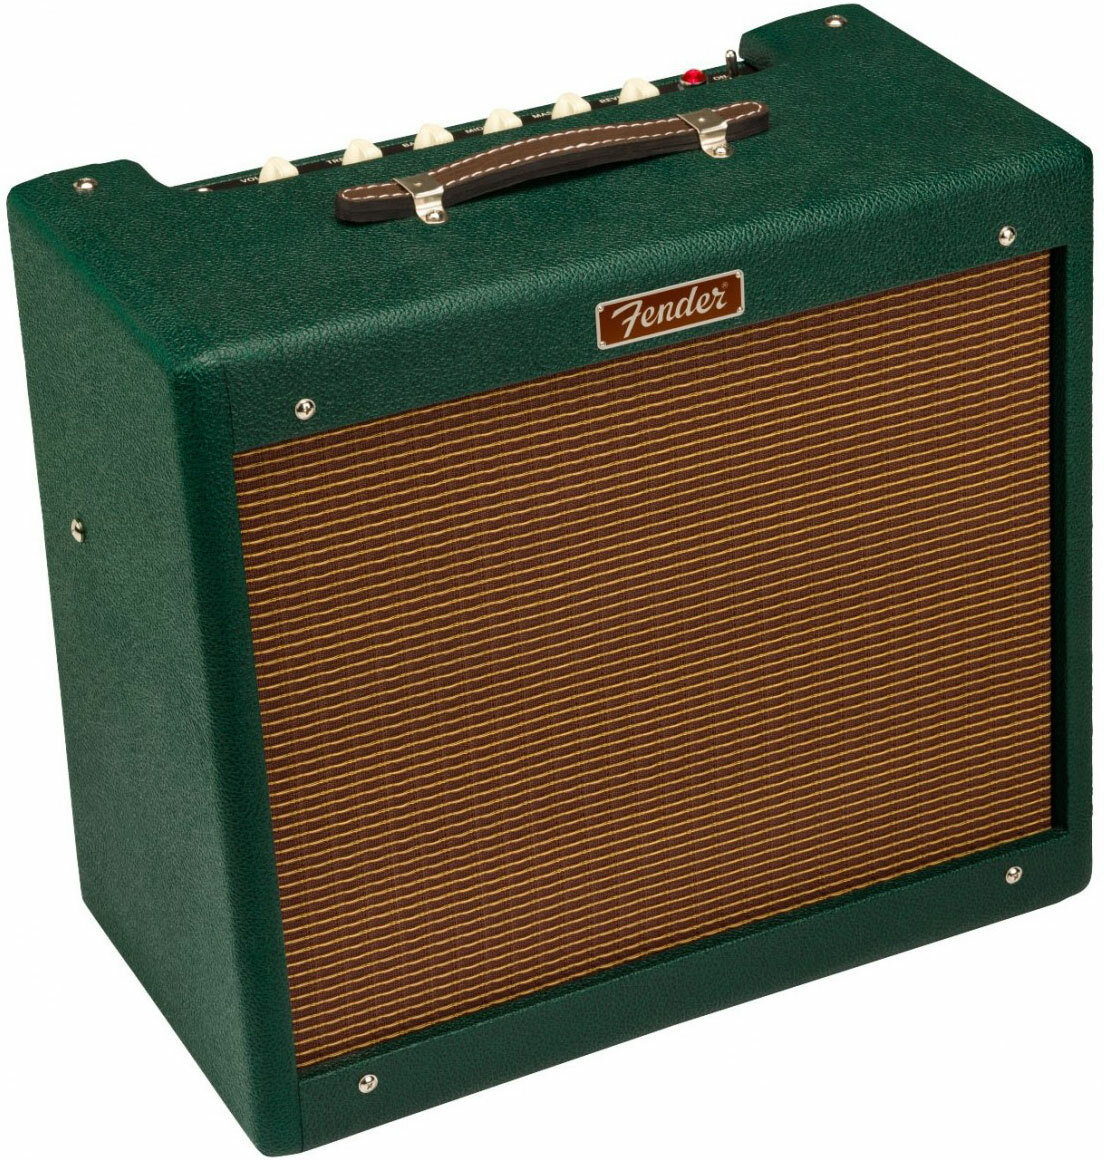 Fender Blues Junior Iv Fsr Ltd 15w 1x12 Celestion A-type British Racing Green - Electric guitar combo amp - Main picture